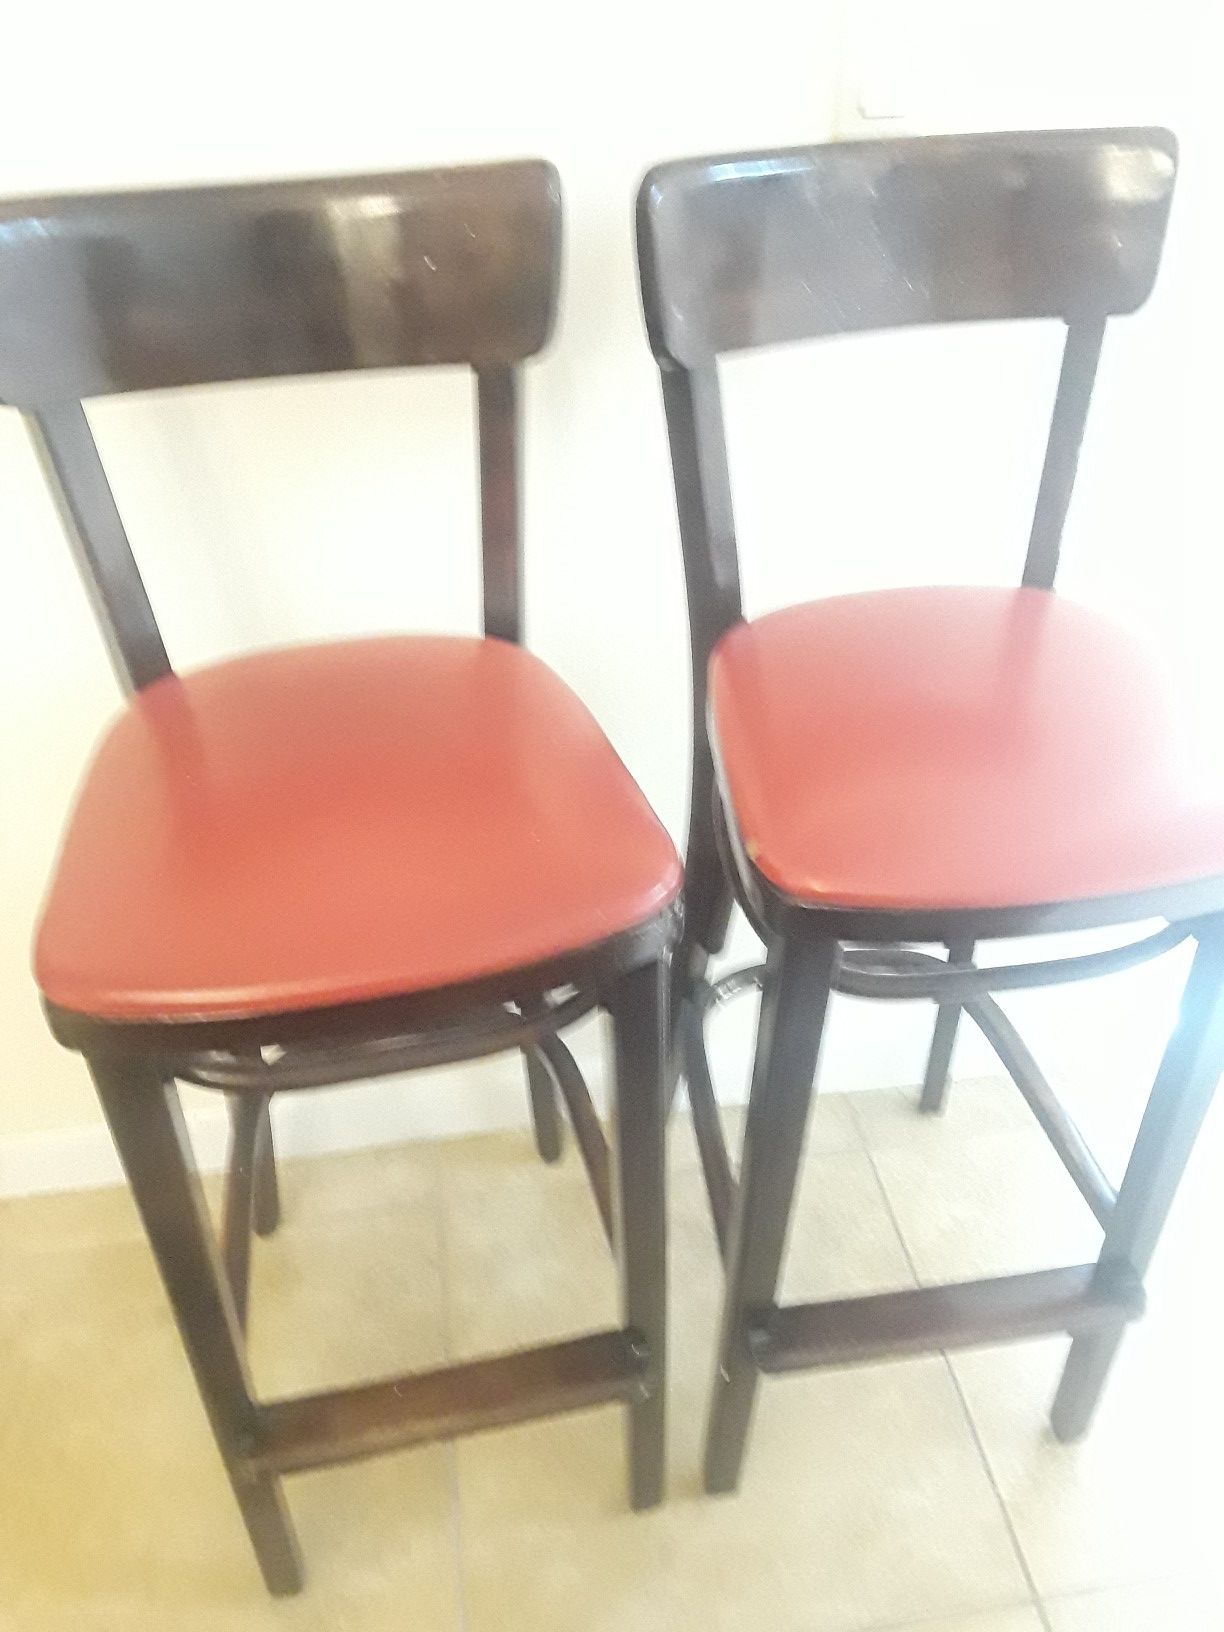 Two counter stools